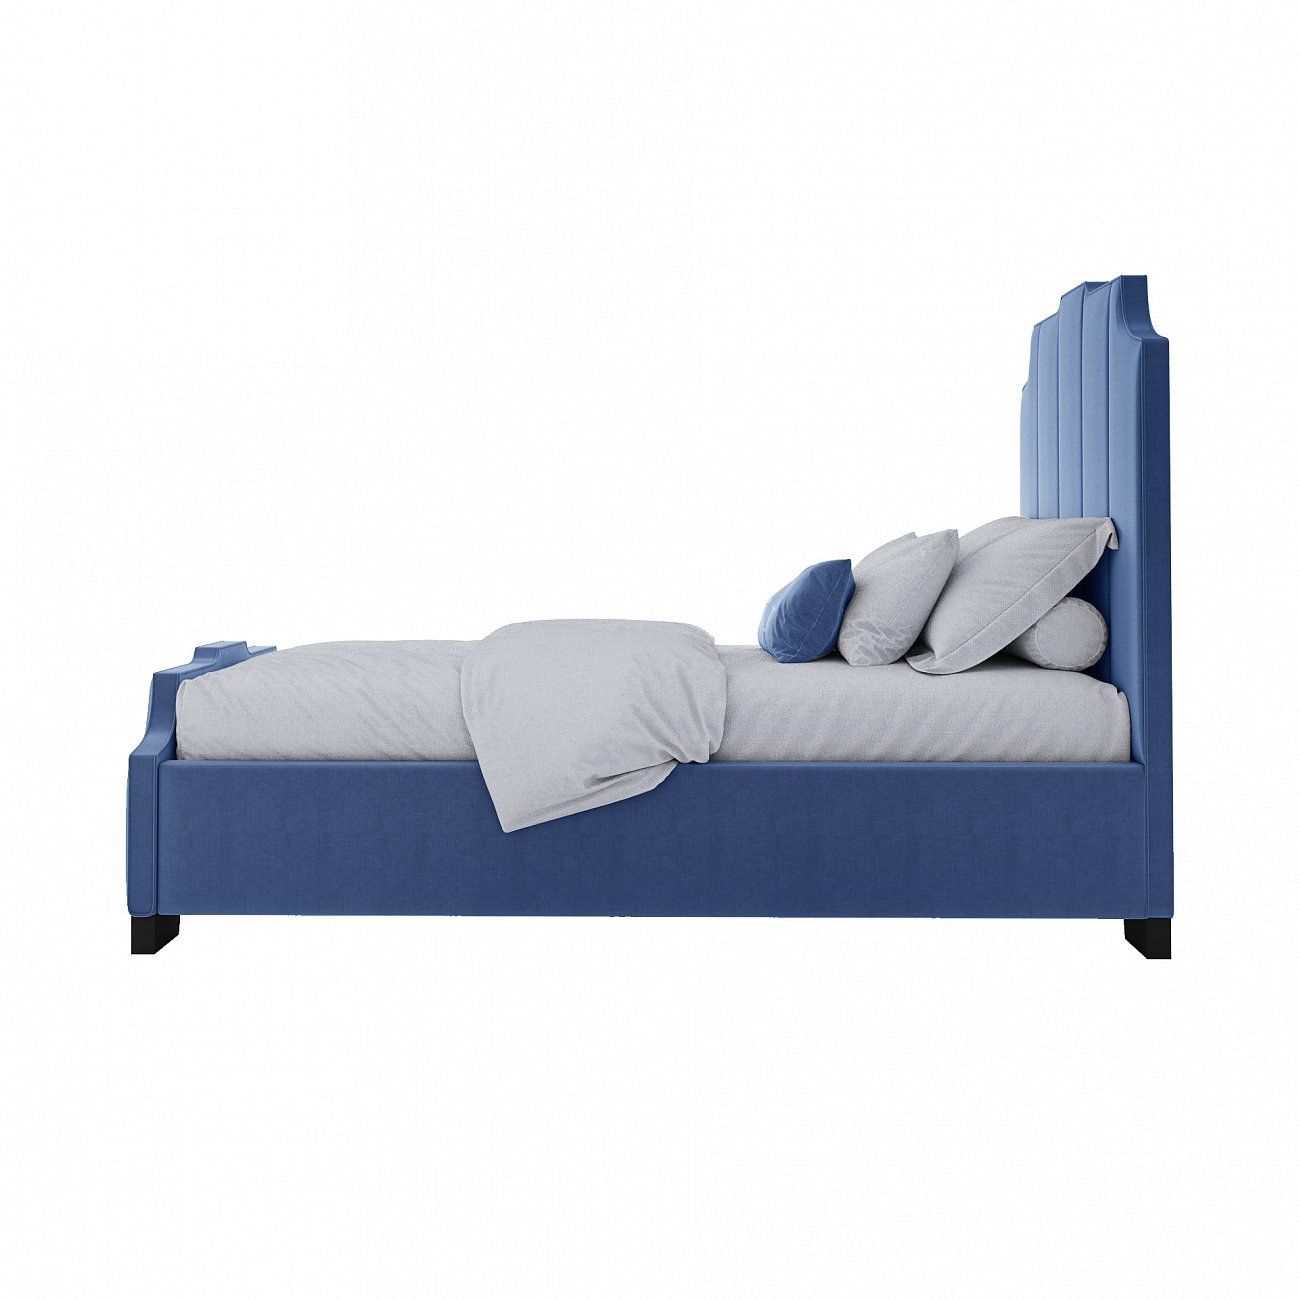 Bony single bed with upholstered headboard 90x200 cm blue